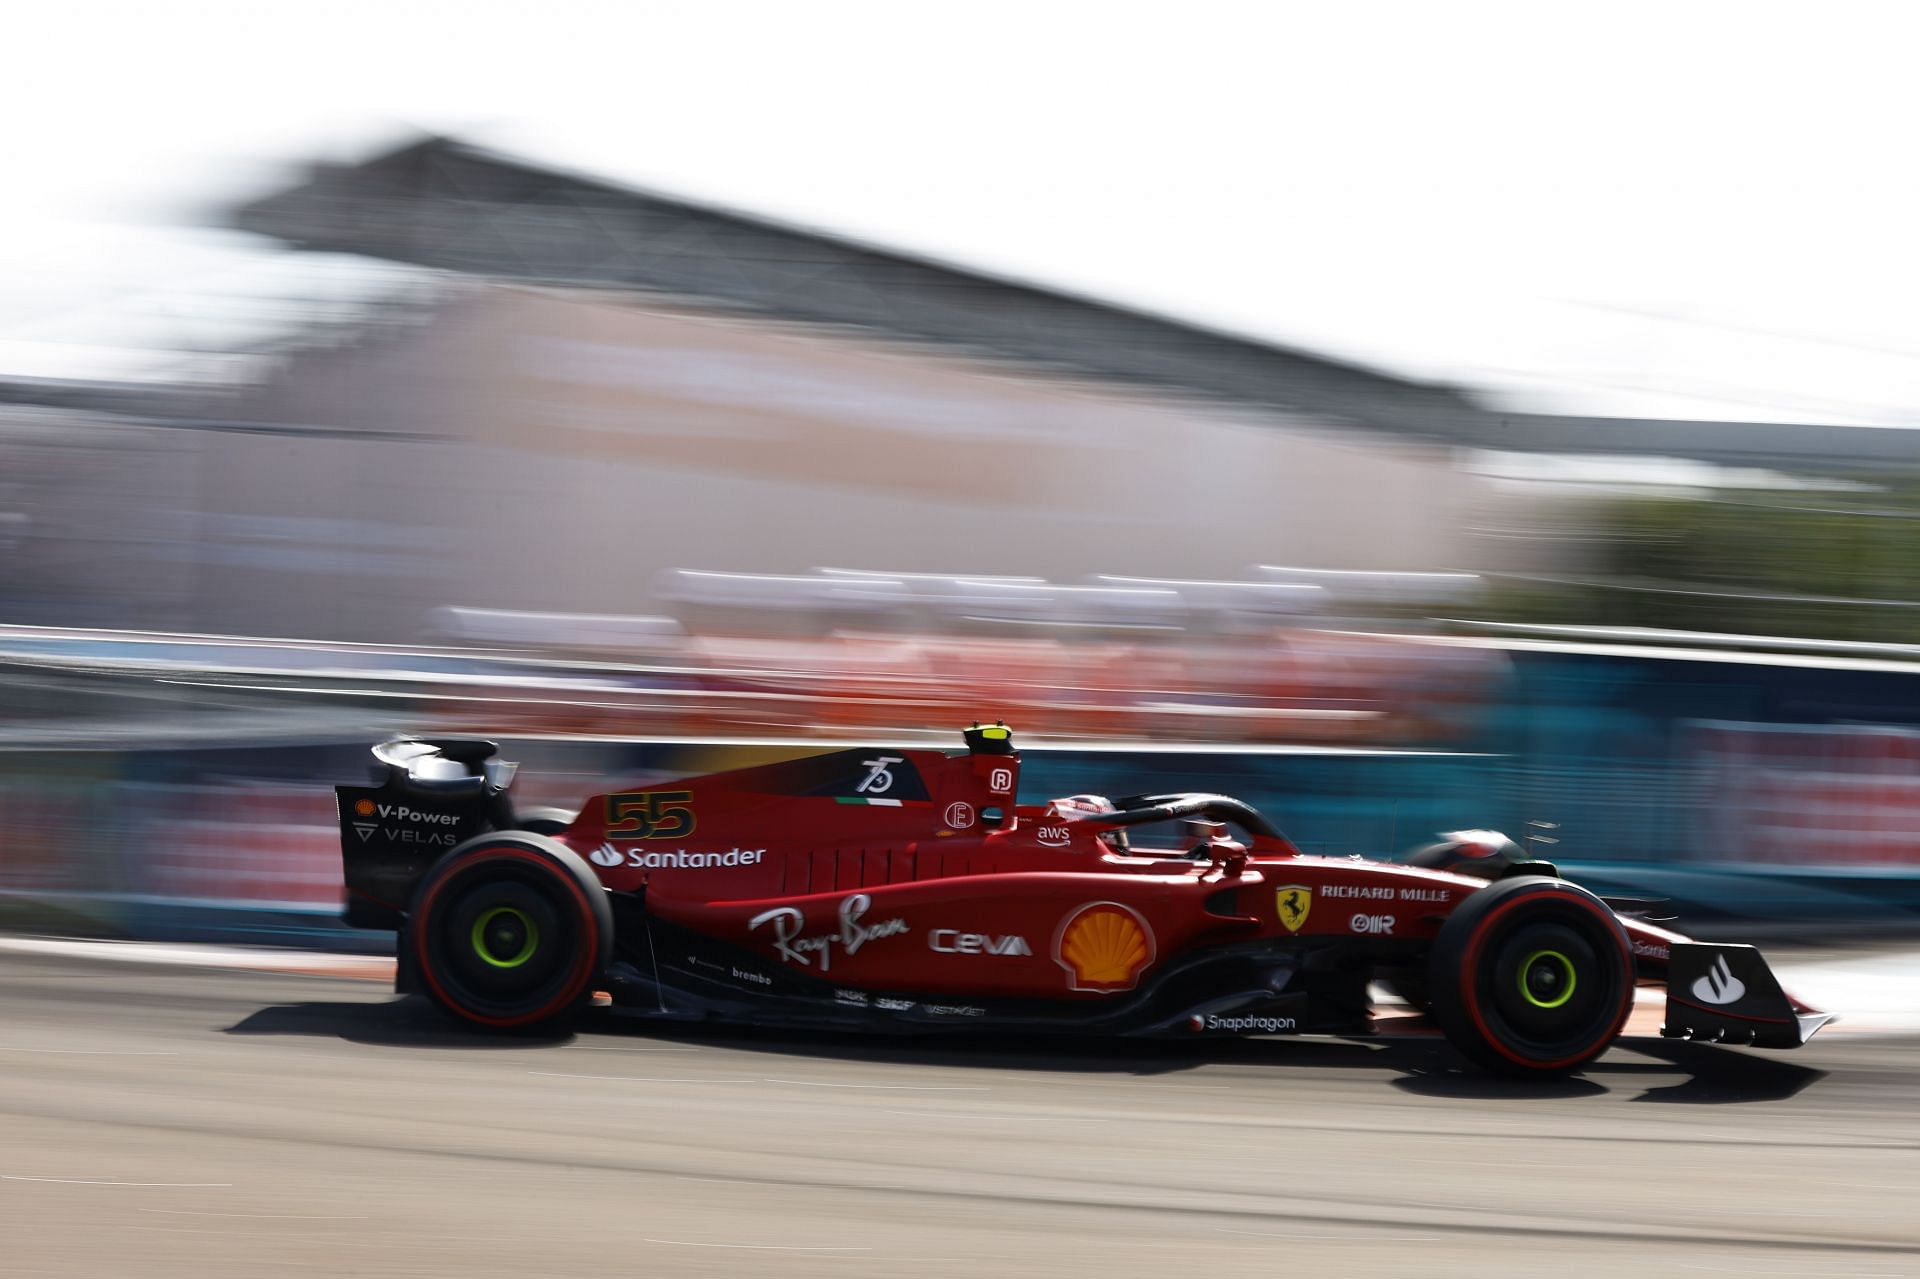 Ferrari driver Carlos Sainz in action during qualifying for the 2022 F1 Miami GP. (Photo by Jared C. Tilton/Getty Images)